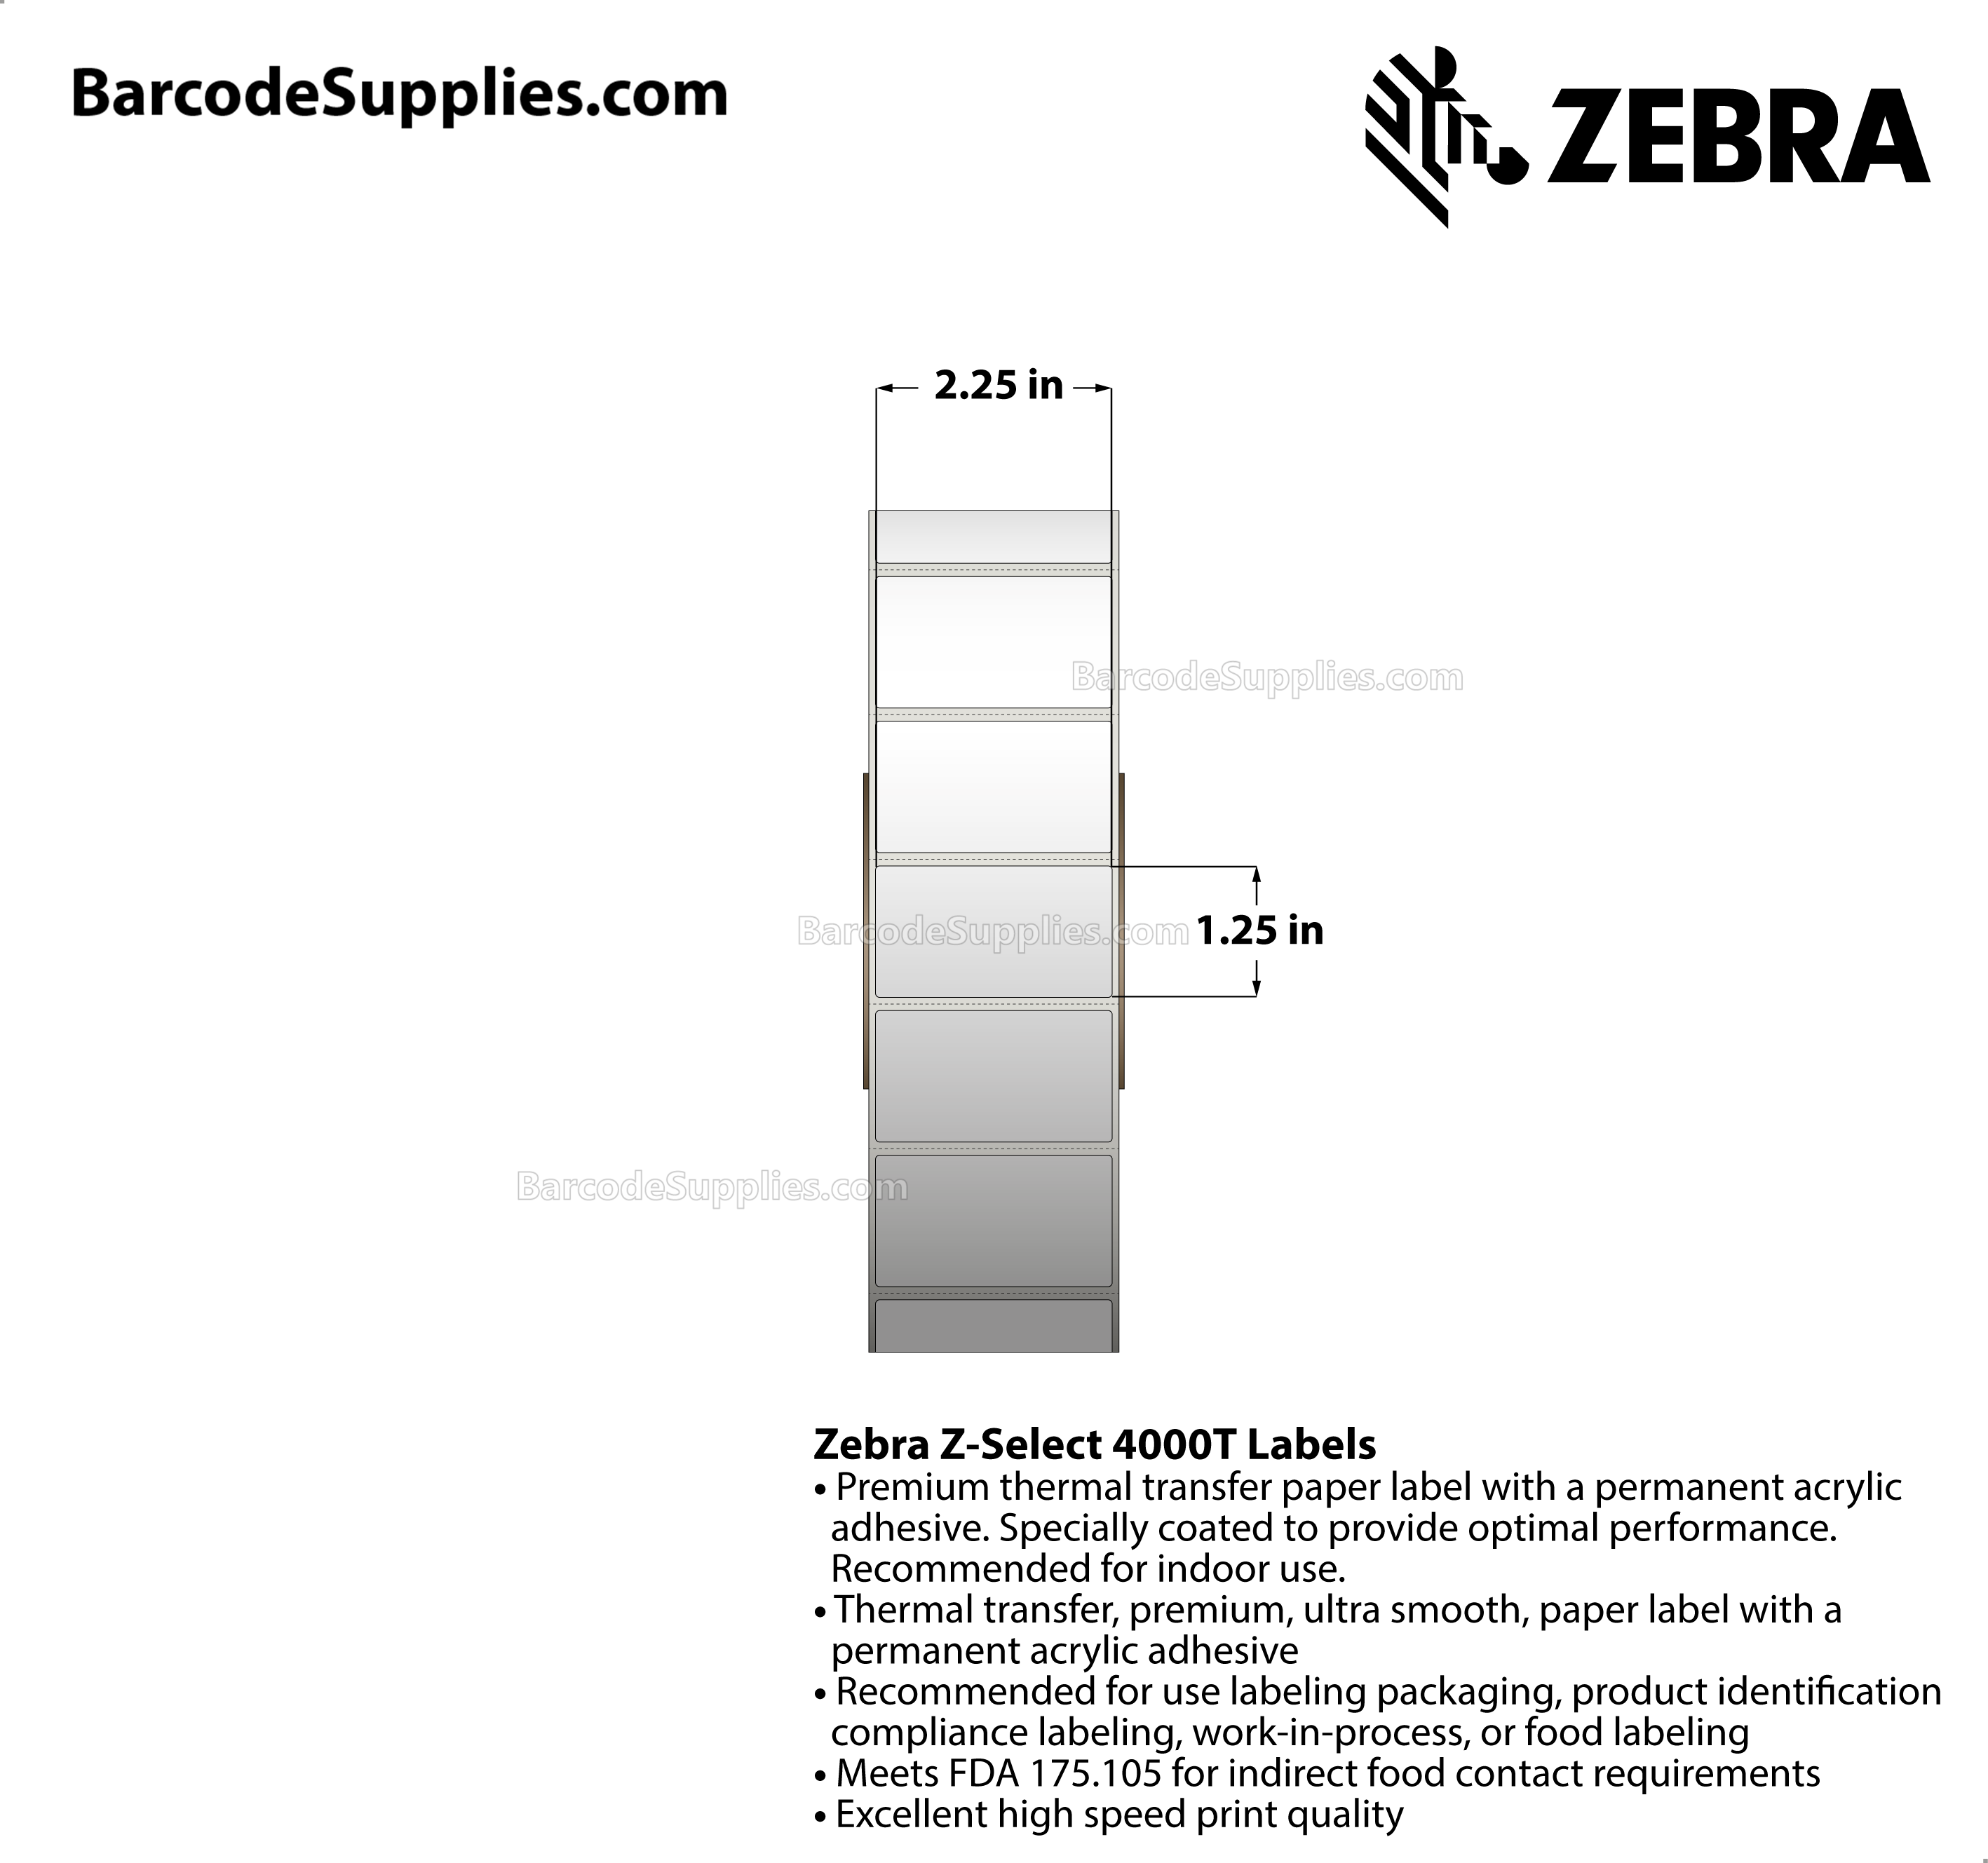 2.25 x 1.25 Thermal Transfer White Z-Select 4000T Labels With Permanent Adhesive - Perforated - 5087 Labels Per Roll - Carton Of 4 Rolls - 20348 Labels Total - MPN: 800622-125